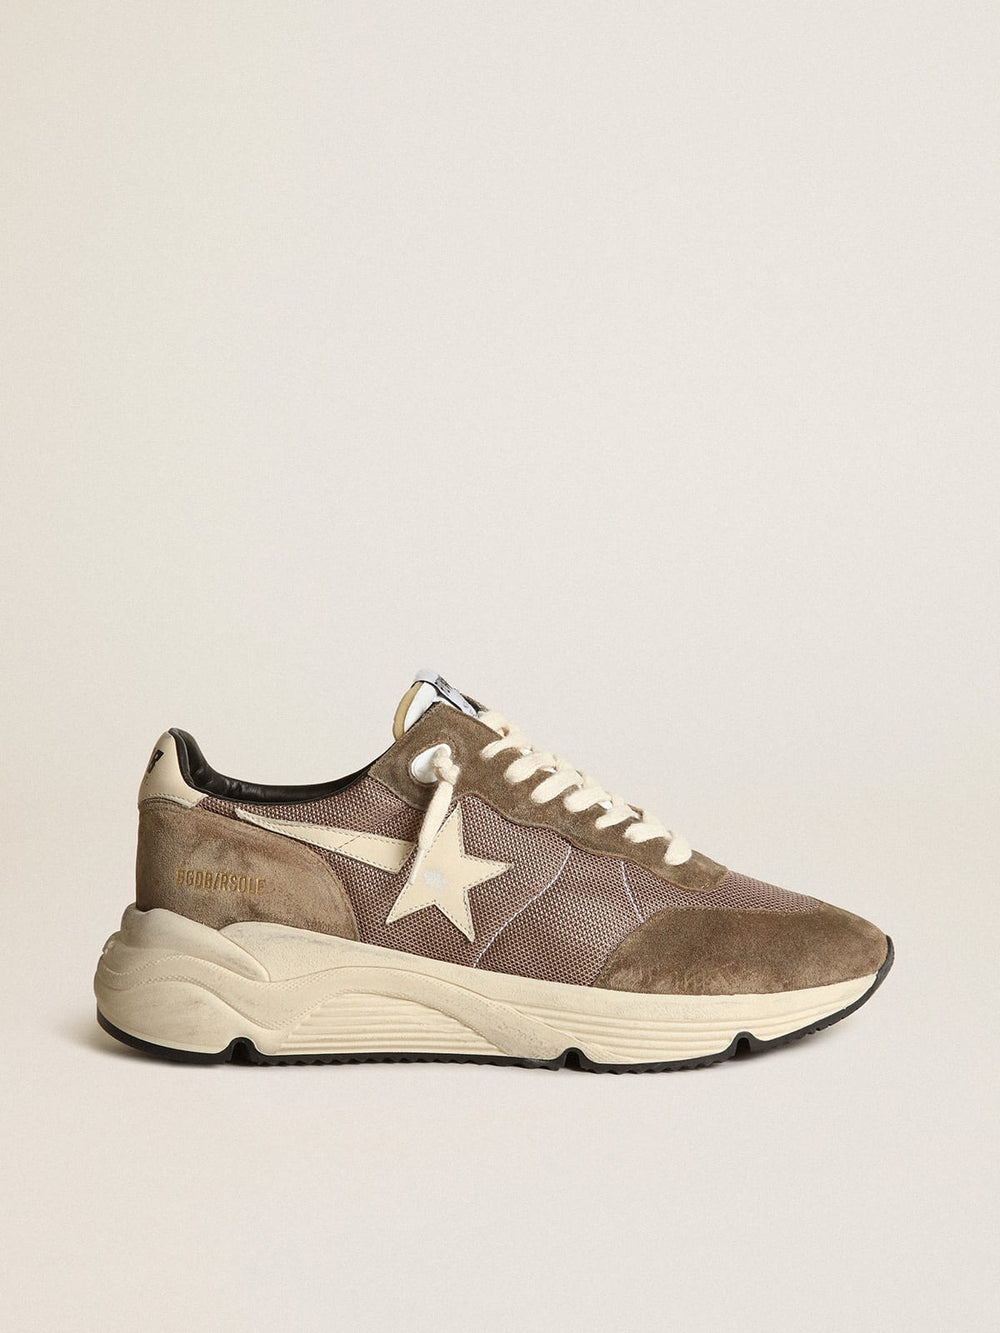 Running Sole in Olive Green Mesh and Leather with Cream Star